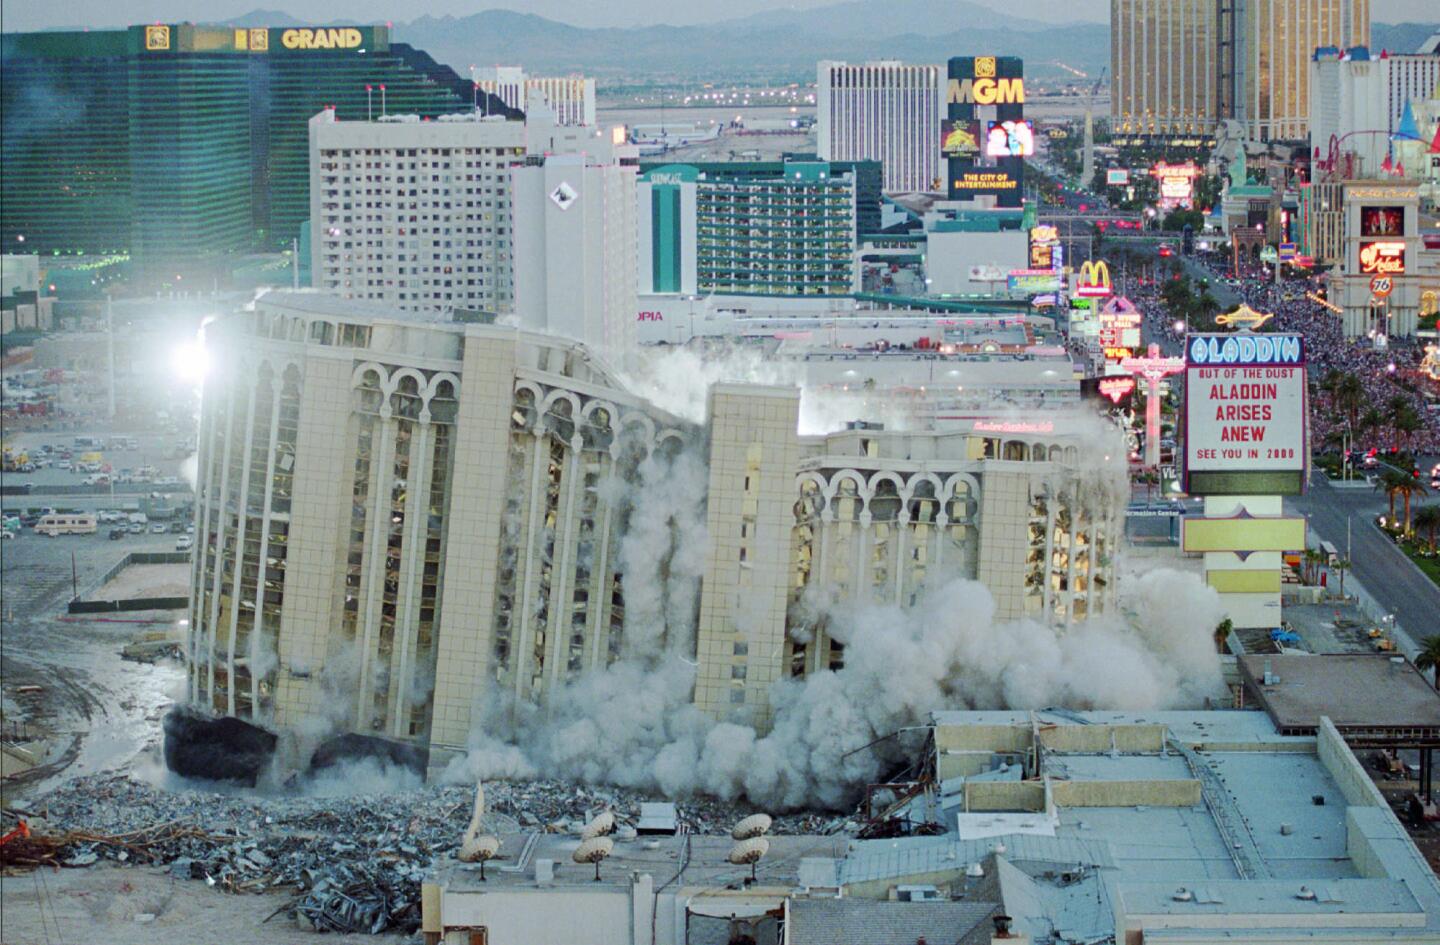 The Aladdin Hotel & Casino comes tumbling down as it is imploded, April 27, 1998, in Las Vegas. The Aladdin was built in 1966.